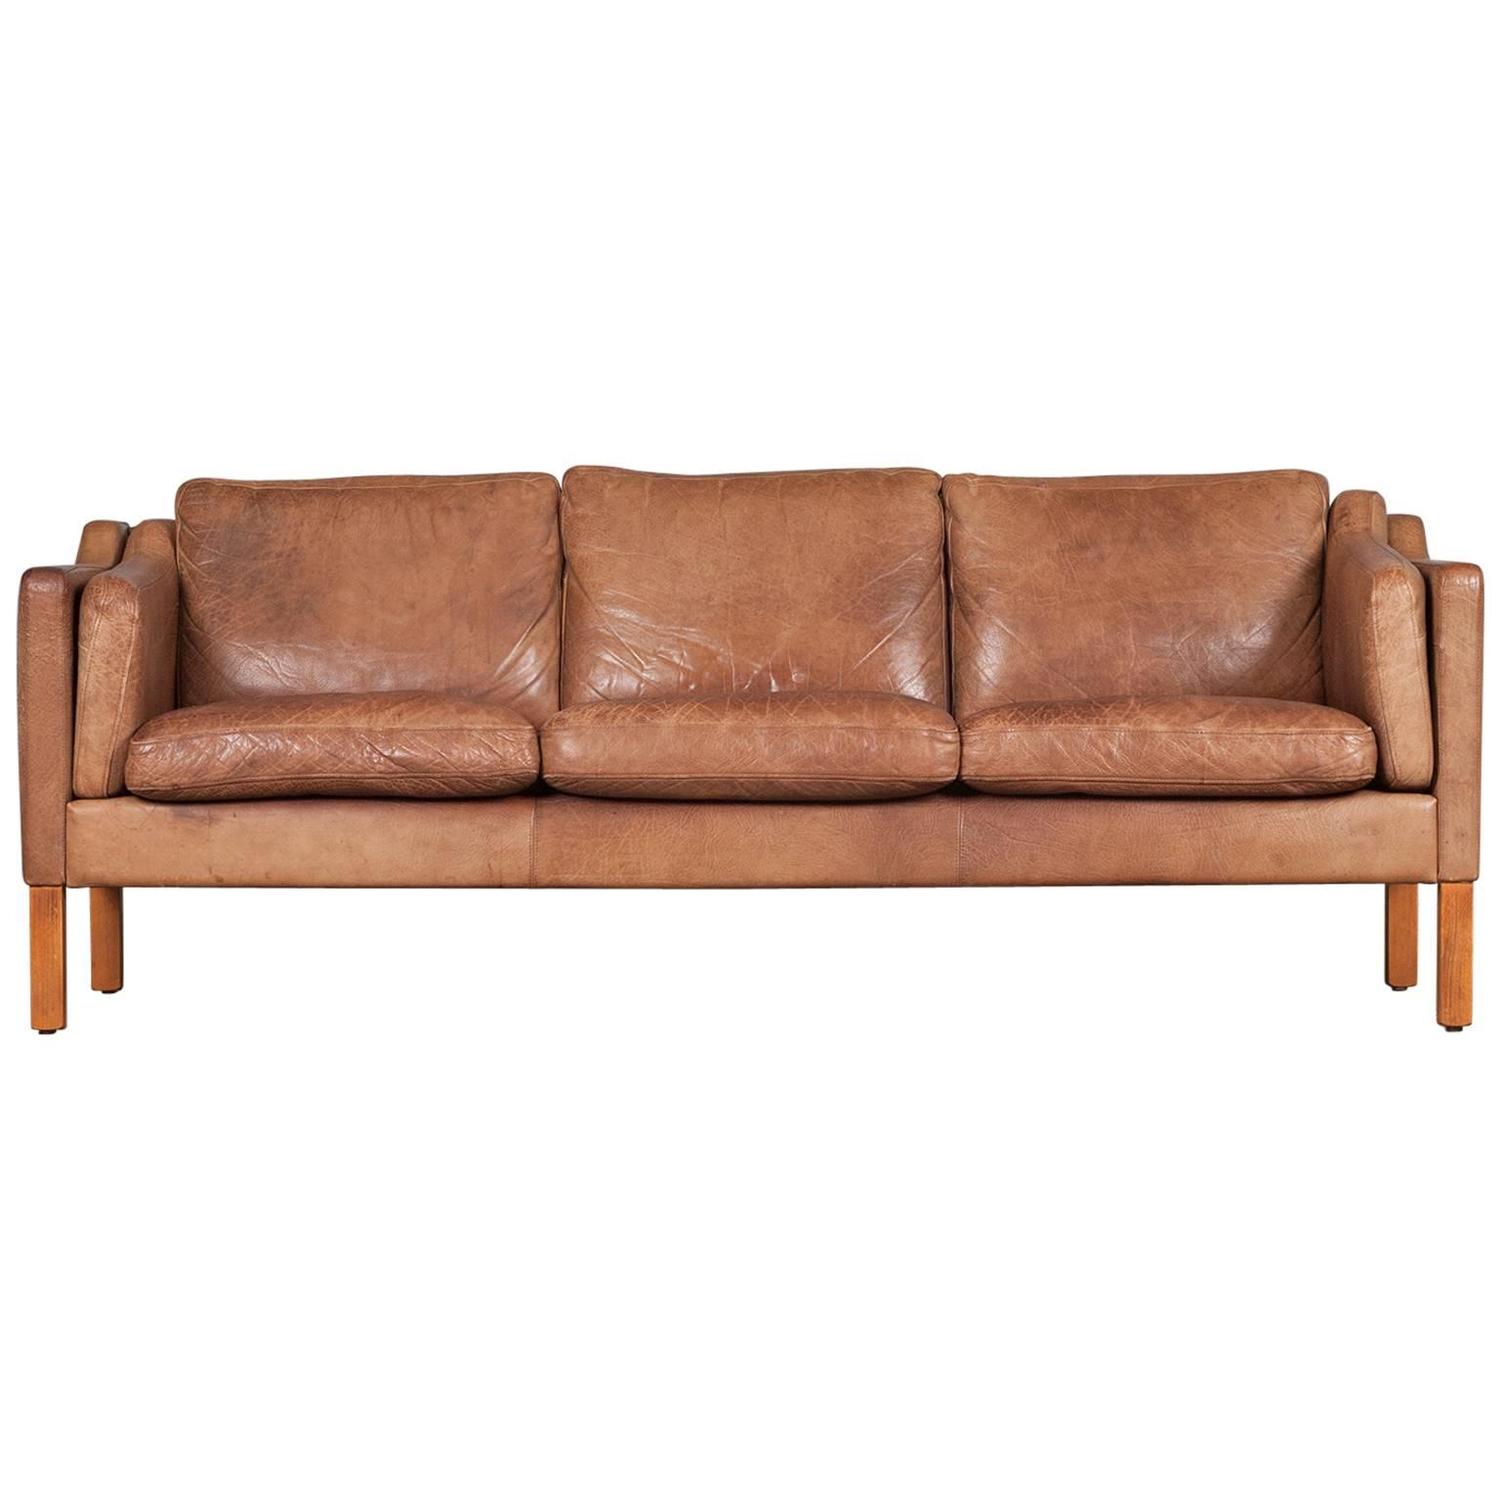 Camel Leather Sofa Leather Sofas Couches Loveseats For